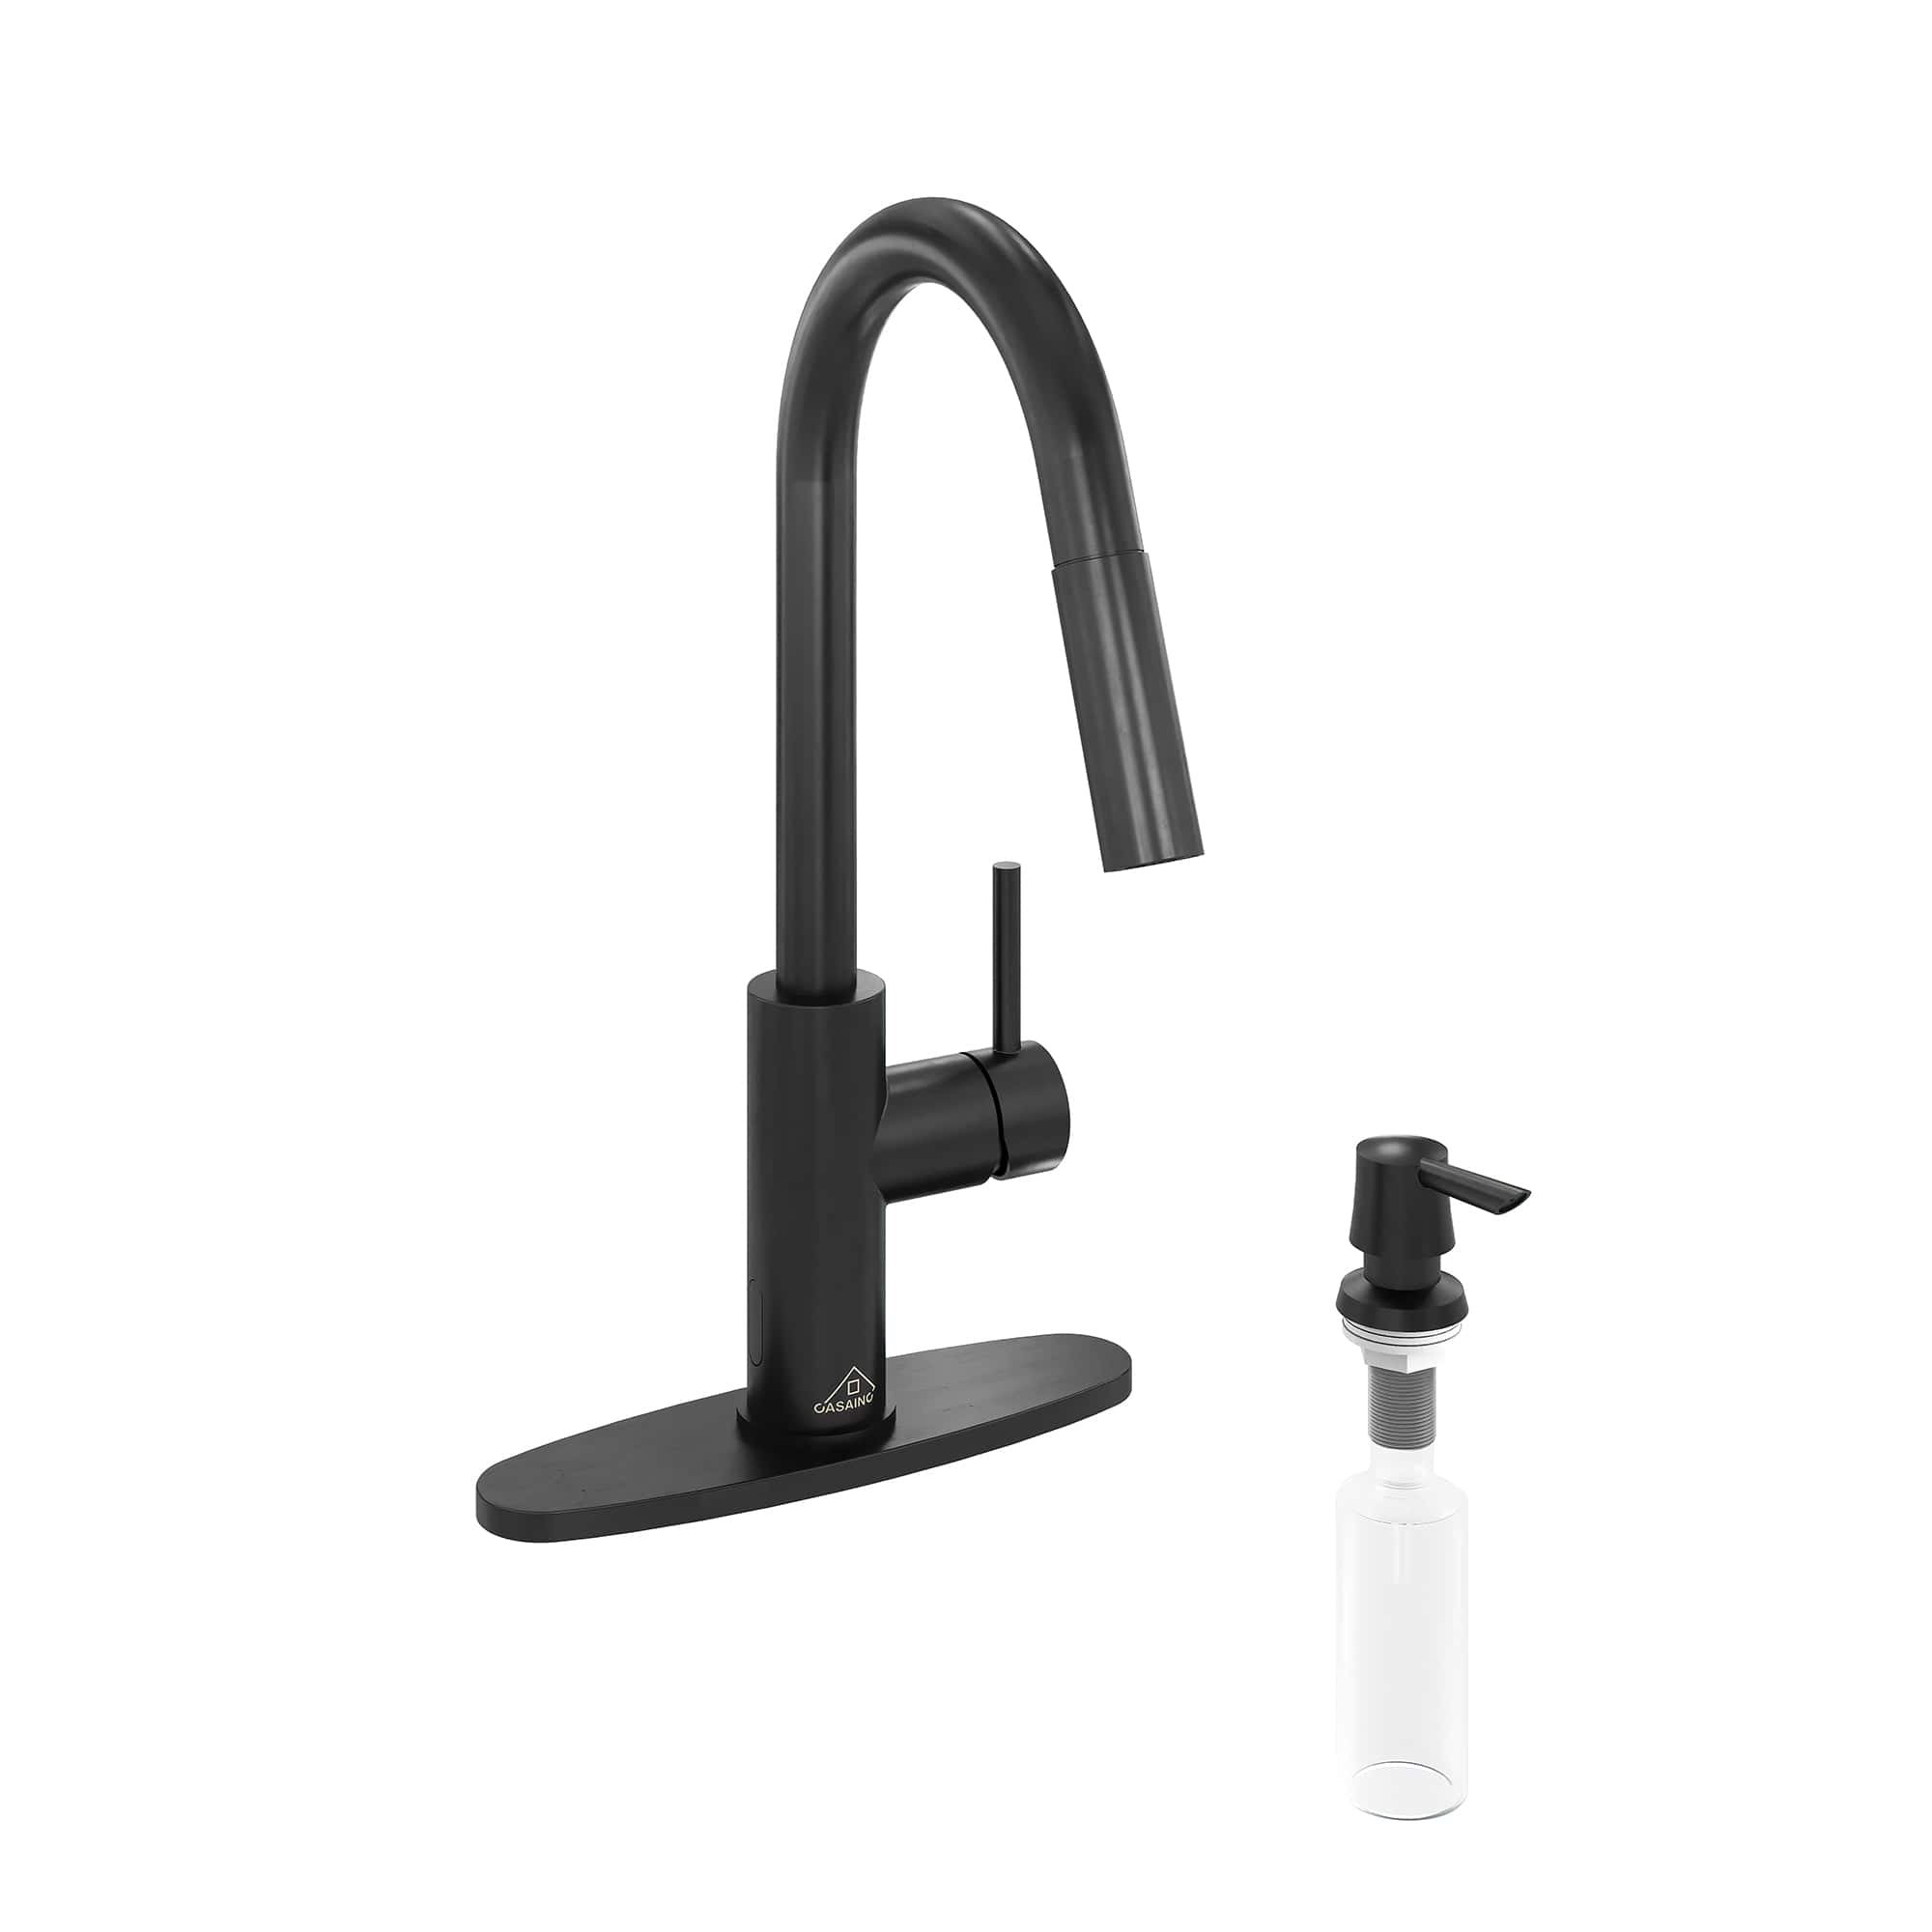 CASAINC 1.8GPM Infrared Induction Pull Kitchen Faucet in Matte Black and More-Casainc Canada